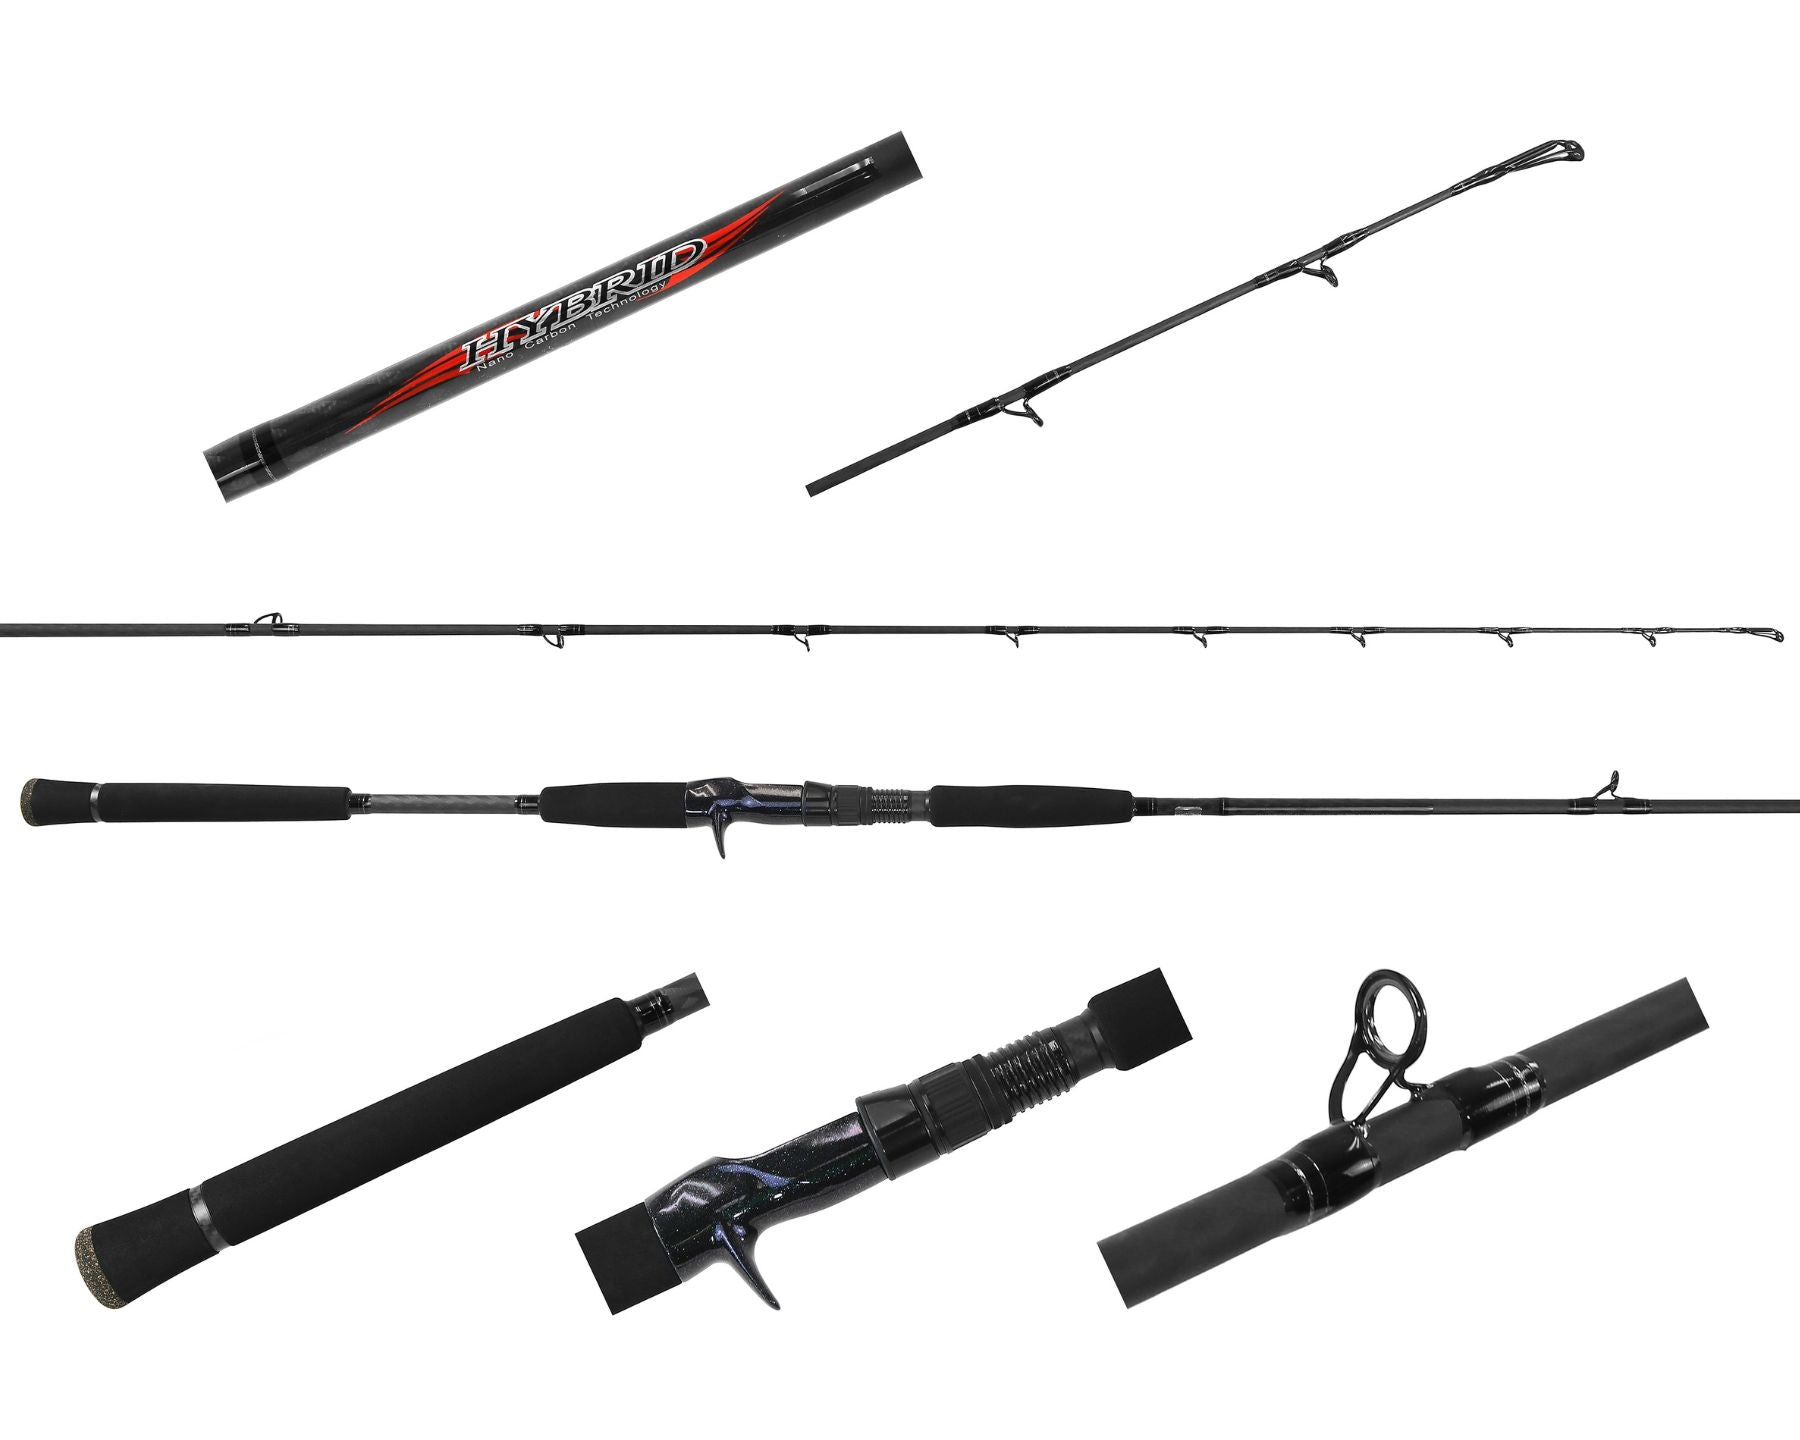 Buy Gkb High Carbon Spinning Fishing Rods With Golden Dragon Wholesale  Fishing Tackle Jig Fishing Rod With Fuji Guide Ring from Yiwu Bajiang Fishing  Tackle Co., Ltd., China